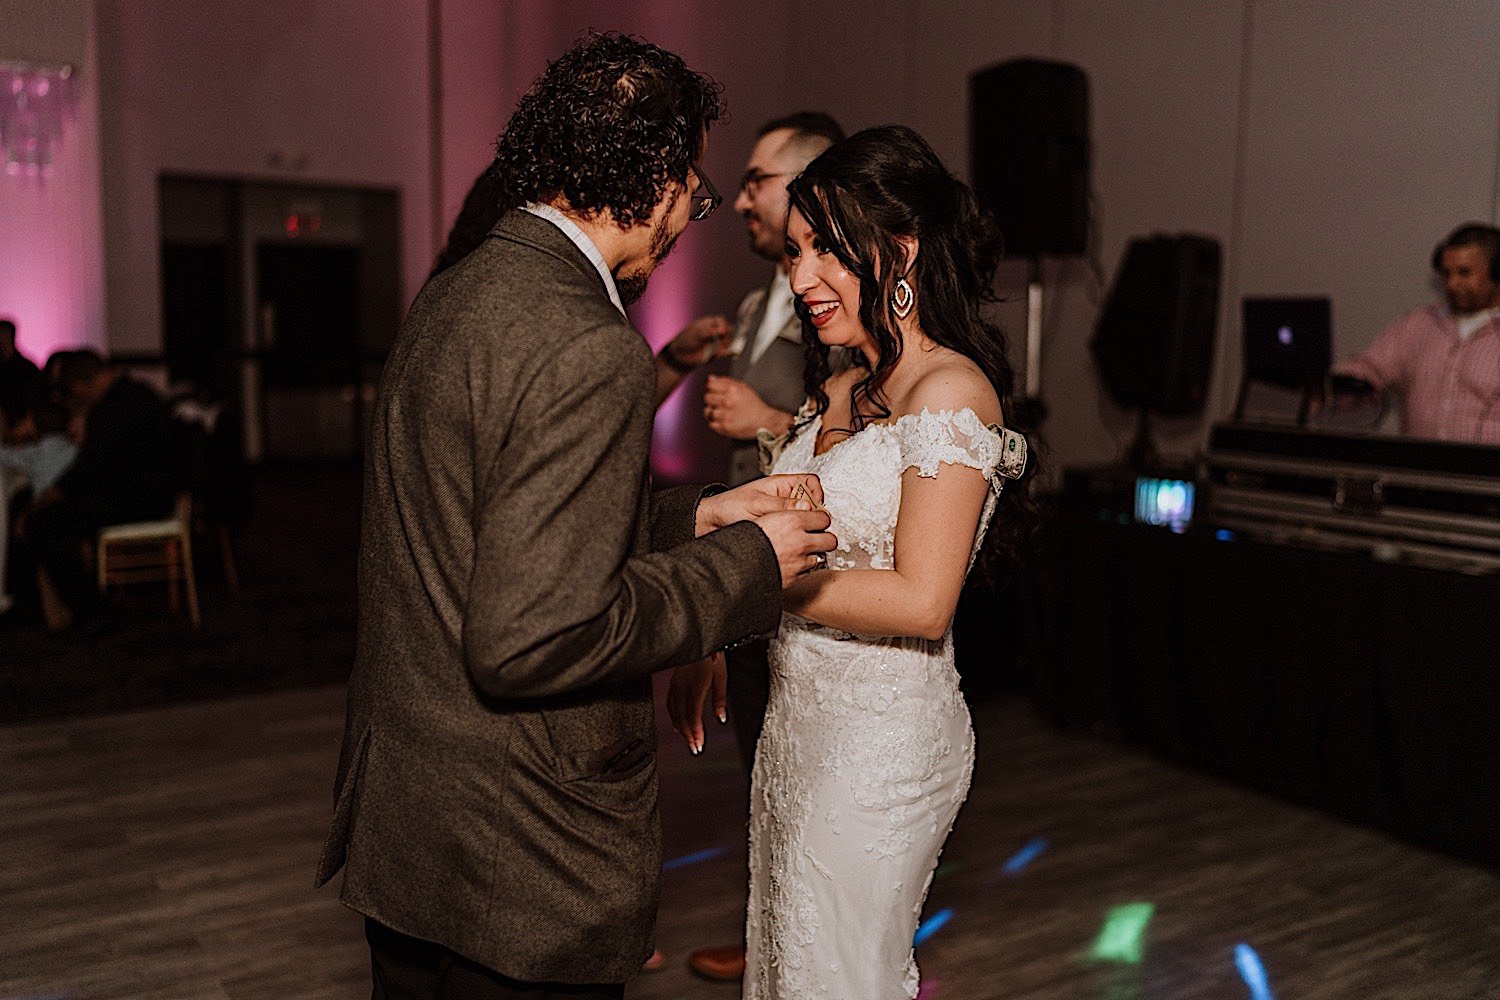 Bride talks with a guest on the dance floor during wedding reception